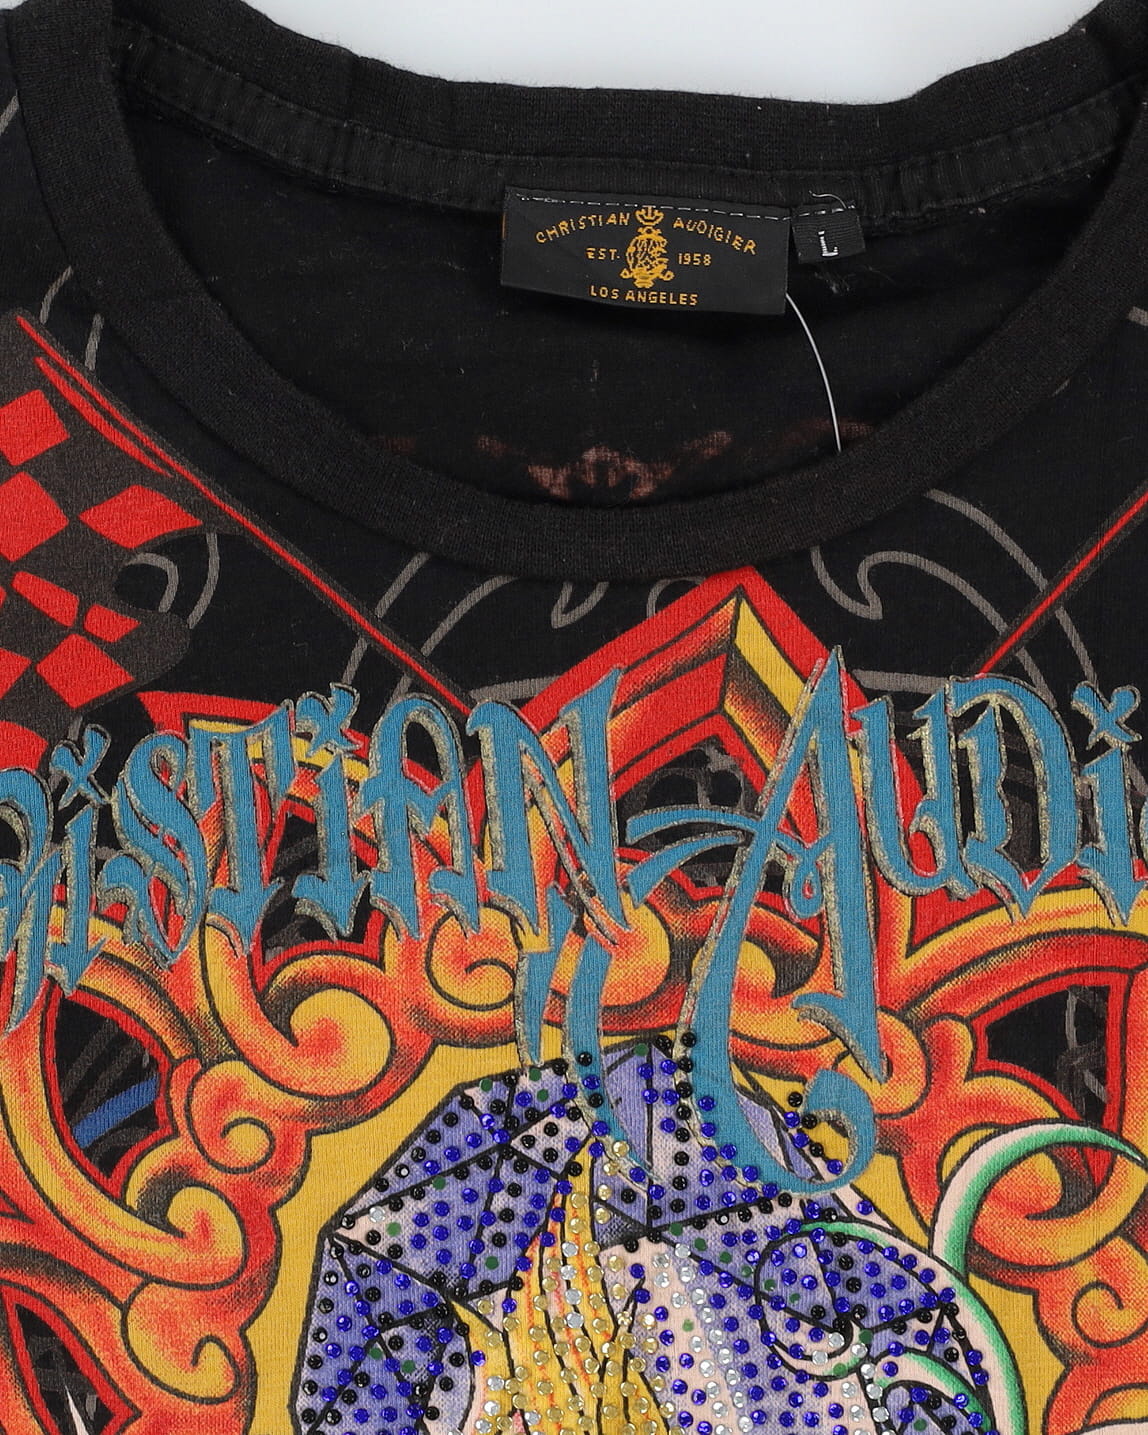 Christian Audgier Ed Hardy Style All Over Print Black T-Shirt - M